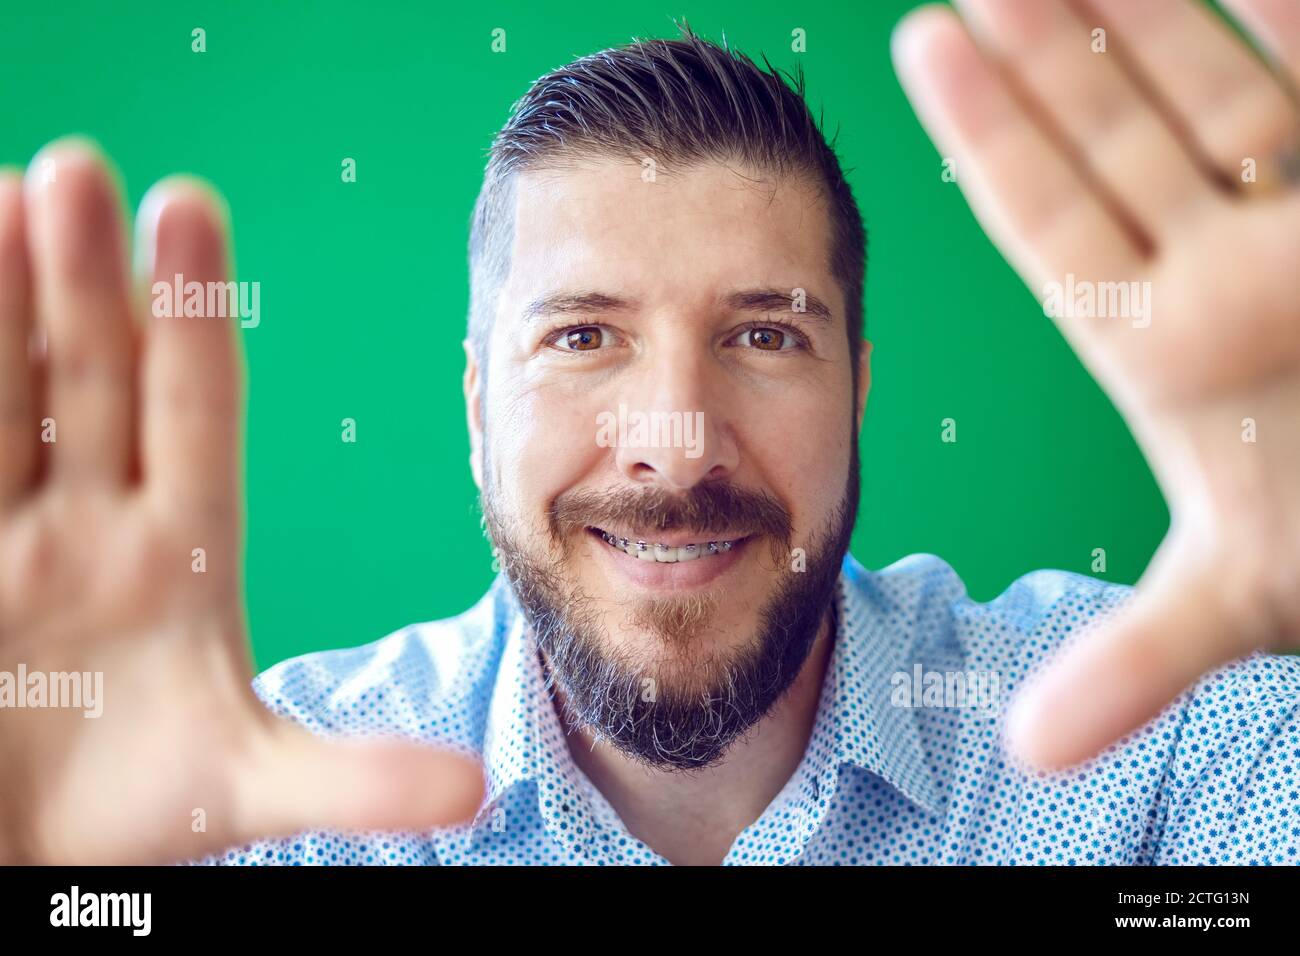 Mature bearded man with braces having fun making a frame with hands Stock Photo